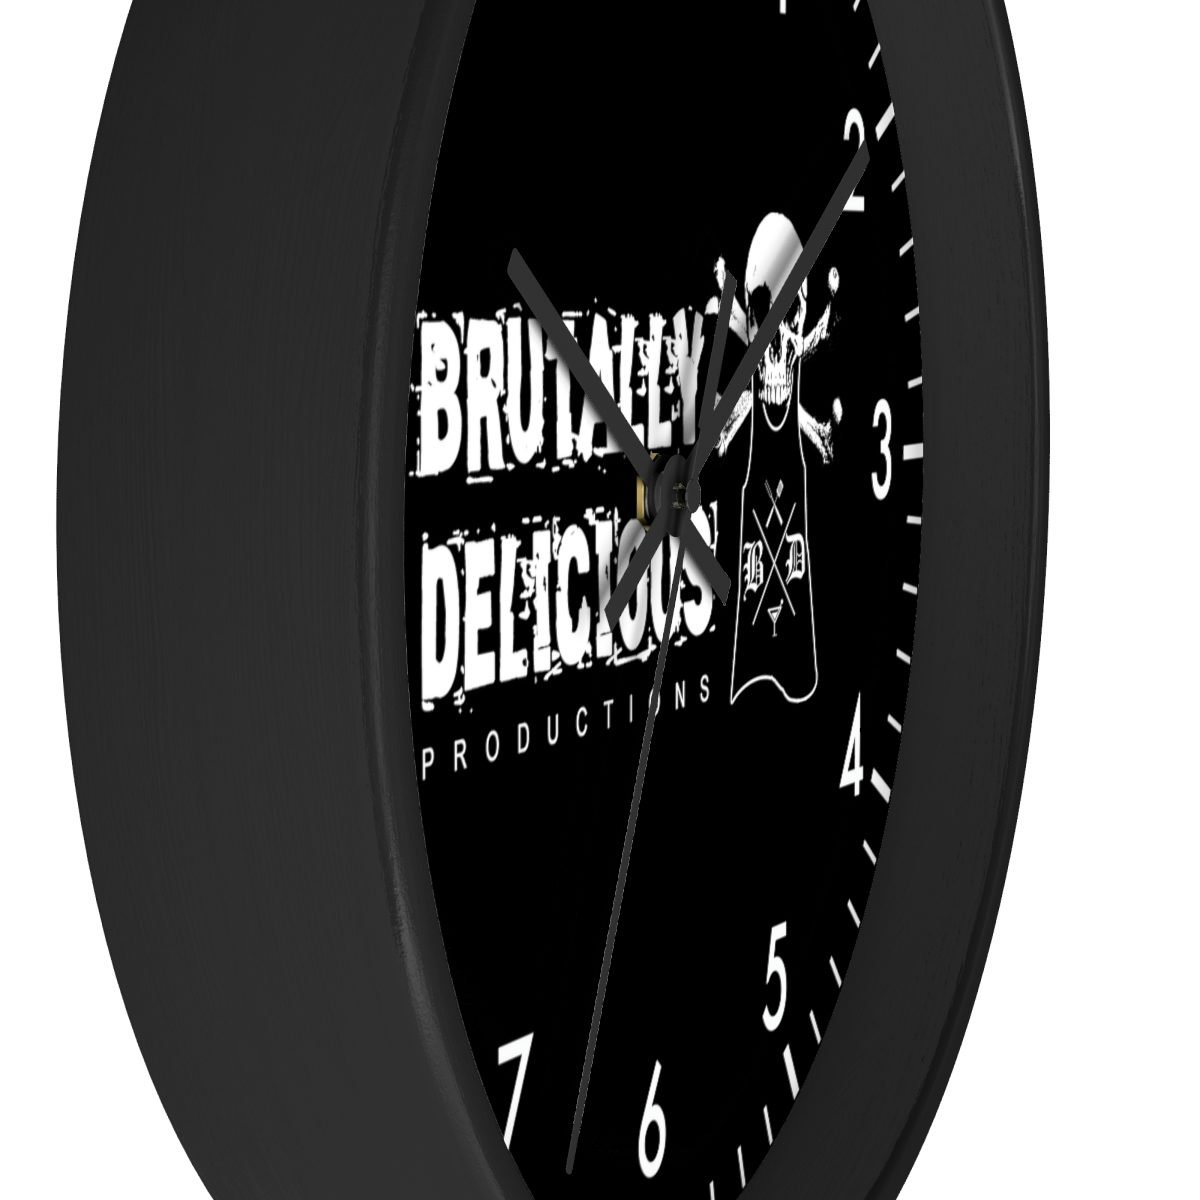 Brutally Delicious Productions Wall clock